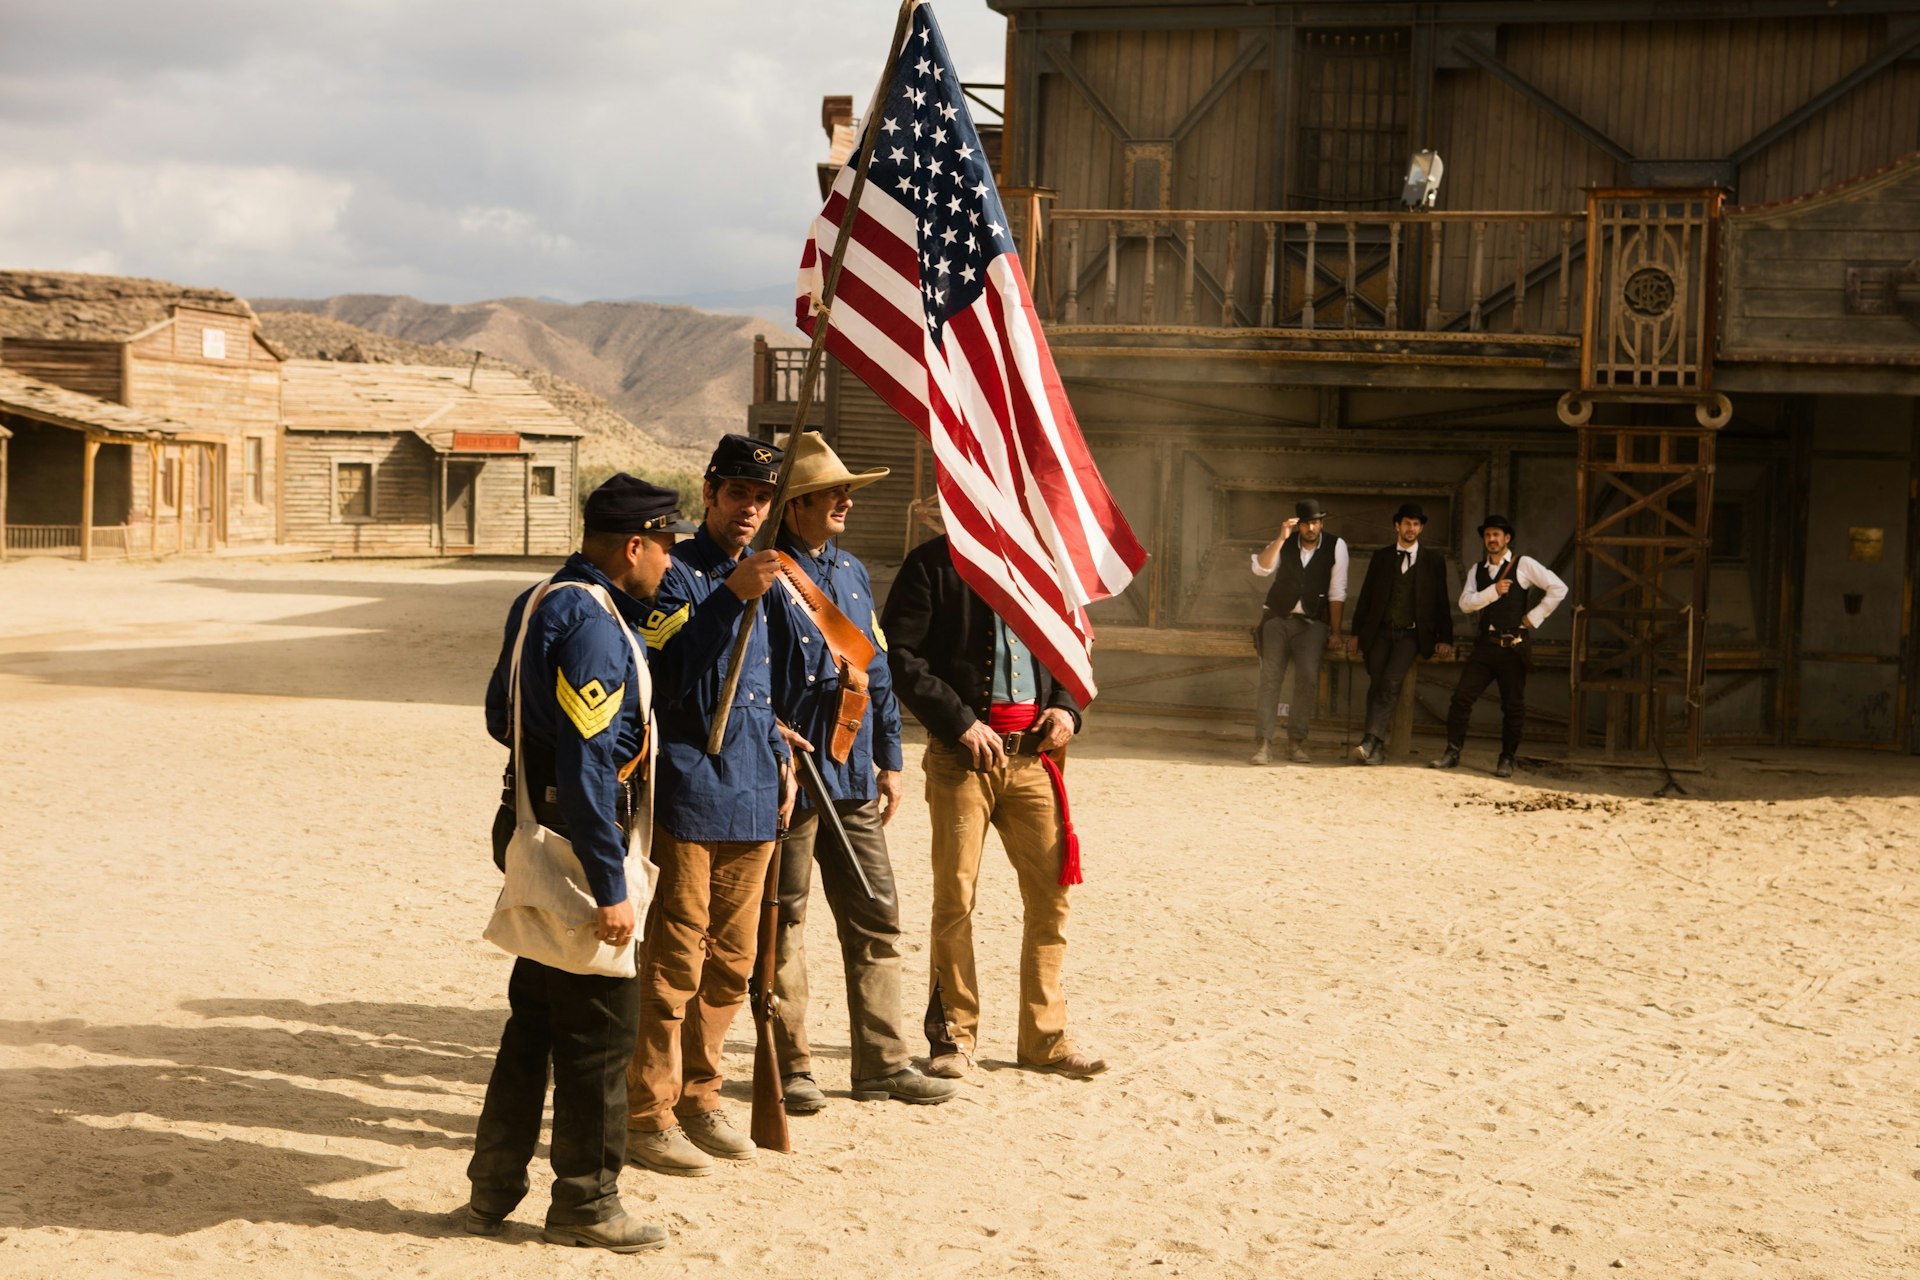 The Ultimate Western, Fort Bravo/Texas Hollywood 